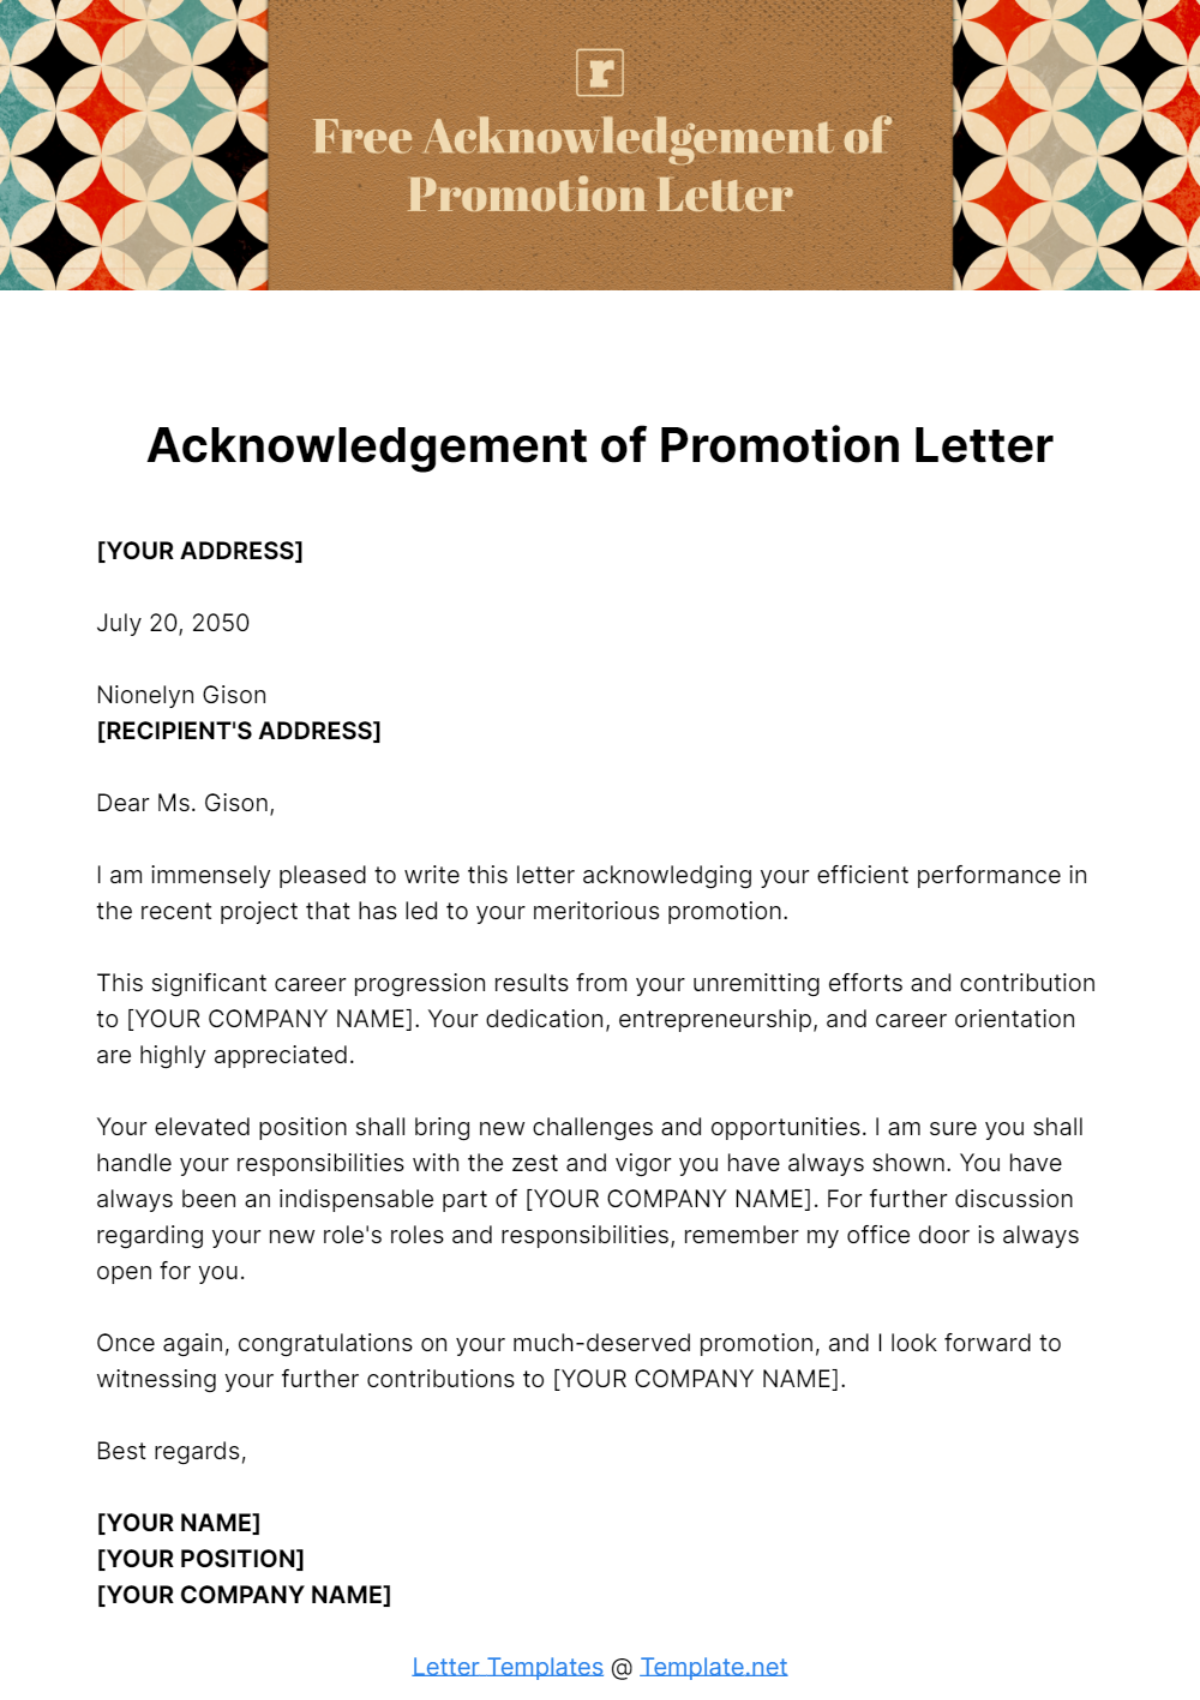 Free Acknowledgement of Promotion Letter Template